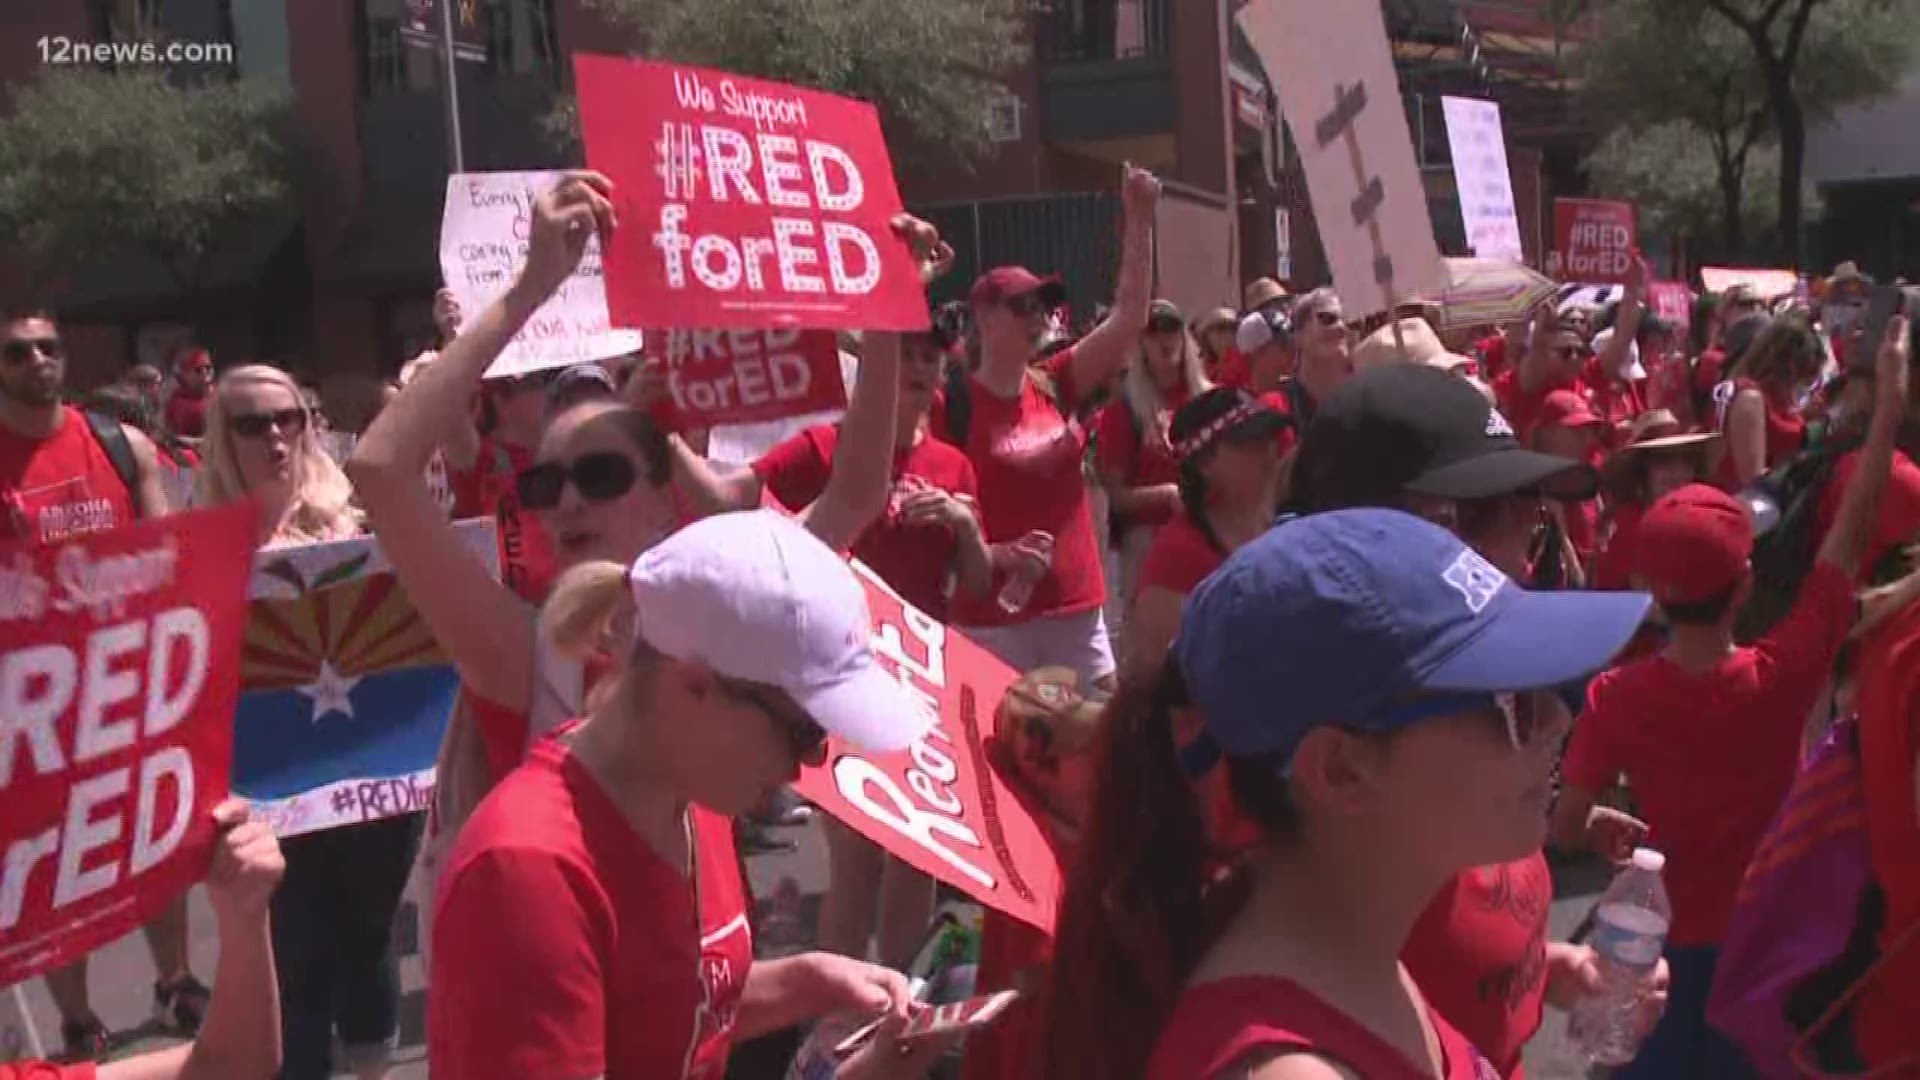 Team 12's Charly Edsitty spoke with educators during the walkout. They shared their personal stories of frustration with the current public education system in Arizona.